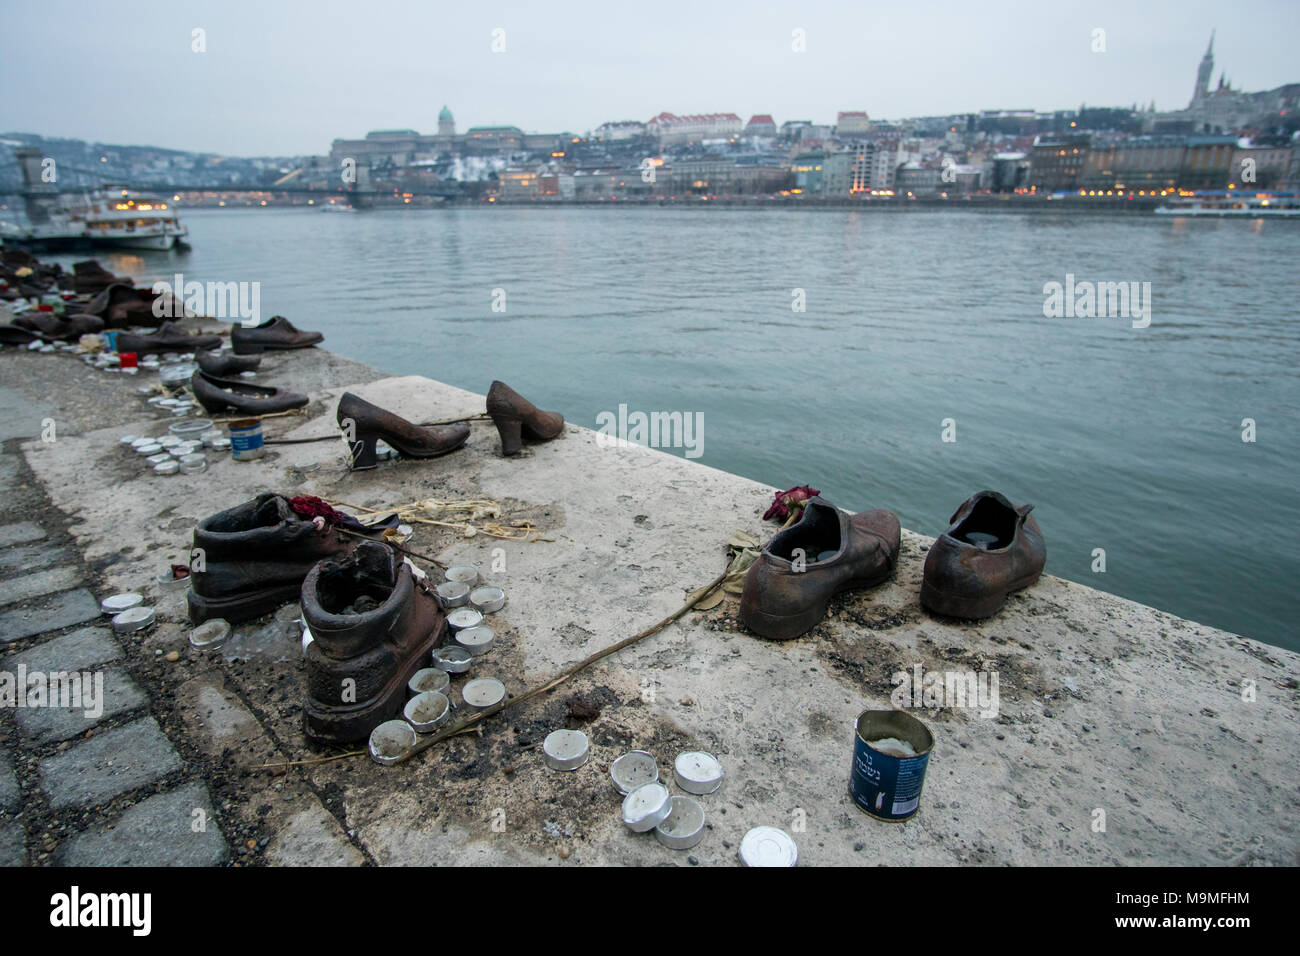 Budapest, Hungary - March 05, 2018: Metal shoes sculptures Shoes on the Danube bank, memorial for Hungarian Jews killed in the second world war Stock Photo